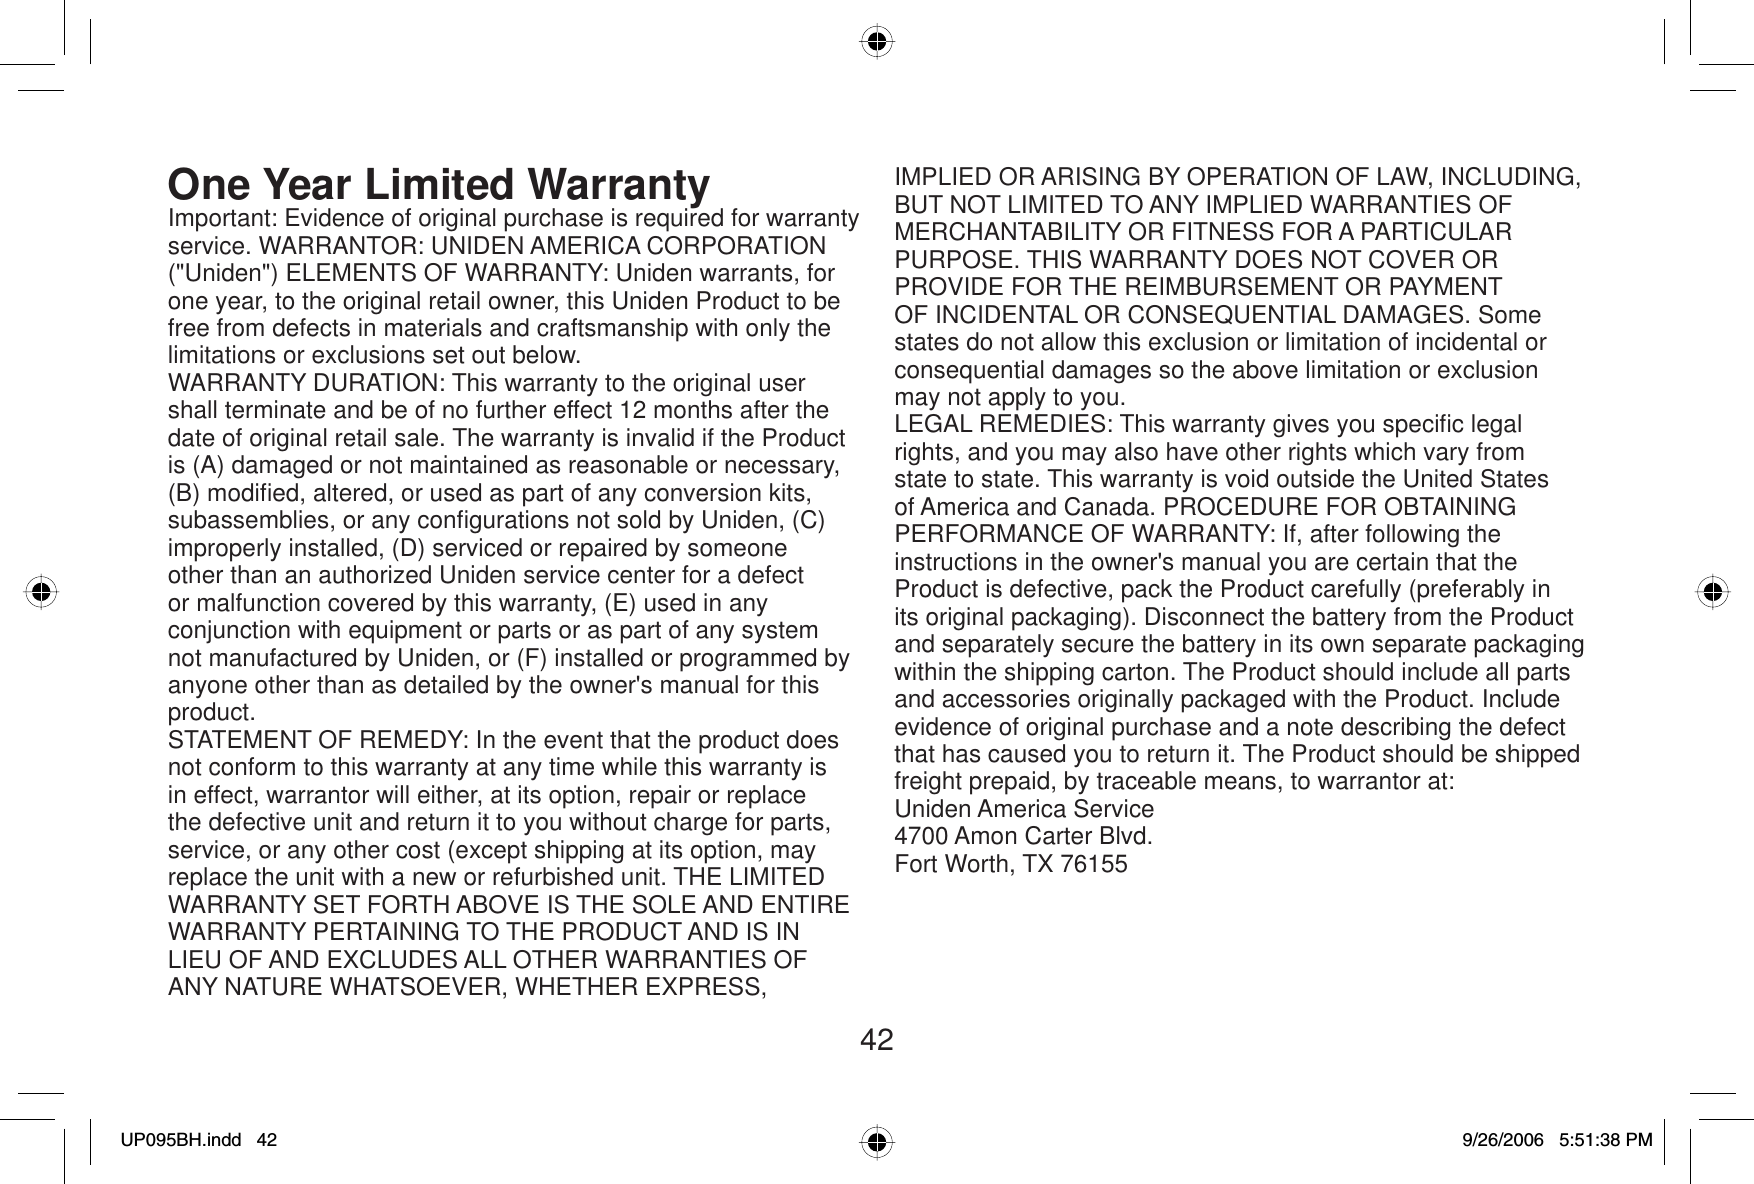 42One Year Limited  WarrantyImportant: Evidence of original purchase is required for warranty service. WARRANTOR: UNIDEN AMERICA CORPORATION (&quot;Uniden&quot;) ELEMENTS OF WARRANTY: Uniden warrants, for one year, to the original retail owner, this Uniden Product to be free from defects in materials and craftsmanship with only the limitations or exclusions set out below.WARRANTY DURATION: This warranty to the original user shall terminate and be of no further effect 12 months after the date of original retail sale. The warranty is invalid if the Product is (A) damaged or not maintained as reasonable or necessary, (B) modiﬁ ed, altered, or used as part of any conversion kits, subassemblies, or any conﬁ gurations not sold by Uniden, (C) improperly installed, (D) serviced or repaired by someone other than an authorized Uniden service center for a defect or malfunction covered by this warranty, (E) used in any conjunction with equipment or parts or as part of any system not manufactured by Uniden, or (F) installed or programmed by anyone other than as detailed by the owner&apos;s manual for this product.STATEMENT OF REMEDY: In the event that the product does not conform to this warranty at any time while this warranty is in effect, warrantor will either, at its option, repair or replace the defective unit and return it to you without charge for parts, service, or any other cost (except shipping at its option, may replace the unit with a new or refurbished unit. THE LIMITED WARRANTY SET FORTH ABOVE IS THE SOLE AND ENTIRE WARRANTY PERTAINING TO THE PRODUCT AND IS IN LIEU OF AND EXCLUDES ALL OTHER WARRANTIES OF ANY NATURE WHATSOEVER, WHETHER EXPRESS, IMPLIED OR ARISING BY OPERATION OF LAW, INCLUDING, BUT NOT LIMITED TO ANY IMPLIED WARRANTIES OF MERCHANTABILITY OR FITNESS FOR A PARTICULAR PURPOSE. THIS WARRANTY DOES NOT COVER OR PROVIDE FOR THE REIMBURSEMENT OR PAYMENT OF INCIDENTAL OR CONSEQUENTIAL DAMAGES. Some states do not allow this exclusion or limitation of incidental or consequential damages so the above limitation or exclusion may not apply to you. LEGAL REMEDIES: This warranty gives you speciﬁ c legal rights, and you may also have other rights which vary from state to state. This warranty is void outside the United States of America and Canada. PROCEDURE FOR OBTAINING PERFORMANCE OF WARRANTY: If, after following the instructions in the owner&apos;s manual you are certain that the Product is defective, pack the Product carefully (preferably in its original packaging). Disconnect the battery from the Product and separately secure the battery in its own separate packaging within the shipping carton. The Product should include all parts and accessories originally packaged with the Product. Include evidence of original purchase and a note describing the defect that has caused you to return it. The Product should be shipped freight prepaid, by traceable means, to warrantor at:Uniden America Service4700 Amon Carter Blvd.Fort Worth, TX 76155UP095BH.indd 42UP095BH.indd   429/26/2006 5:51:38 PM9/26/2006   5:51:38 PM